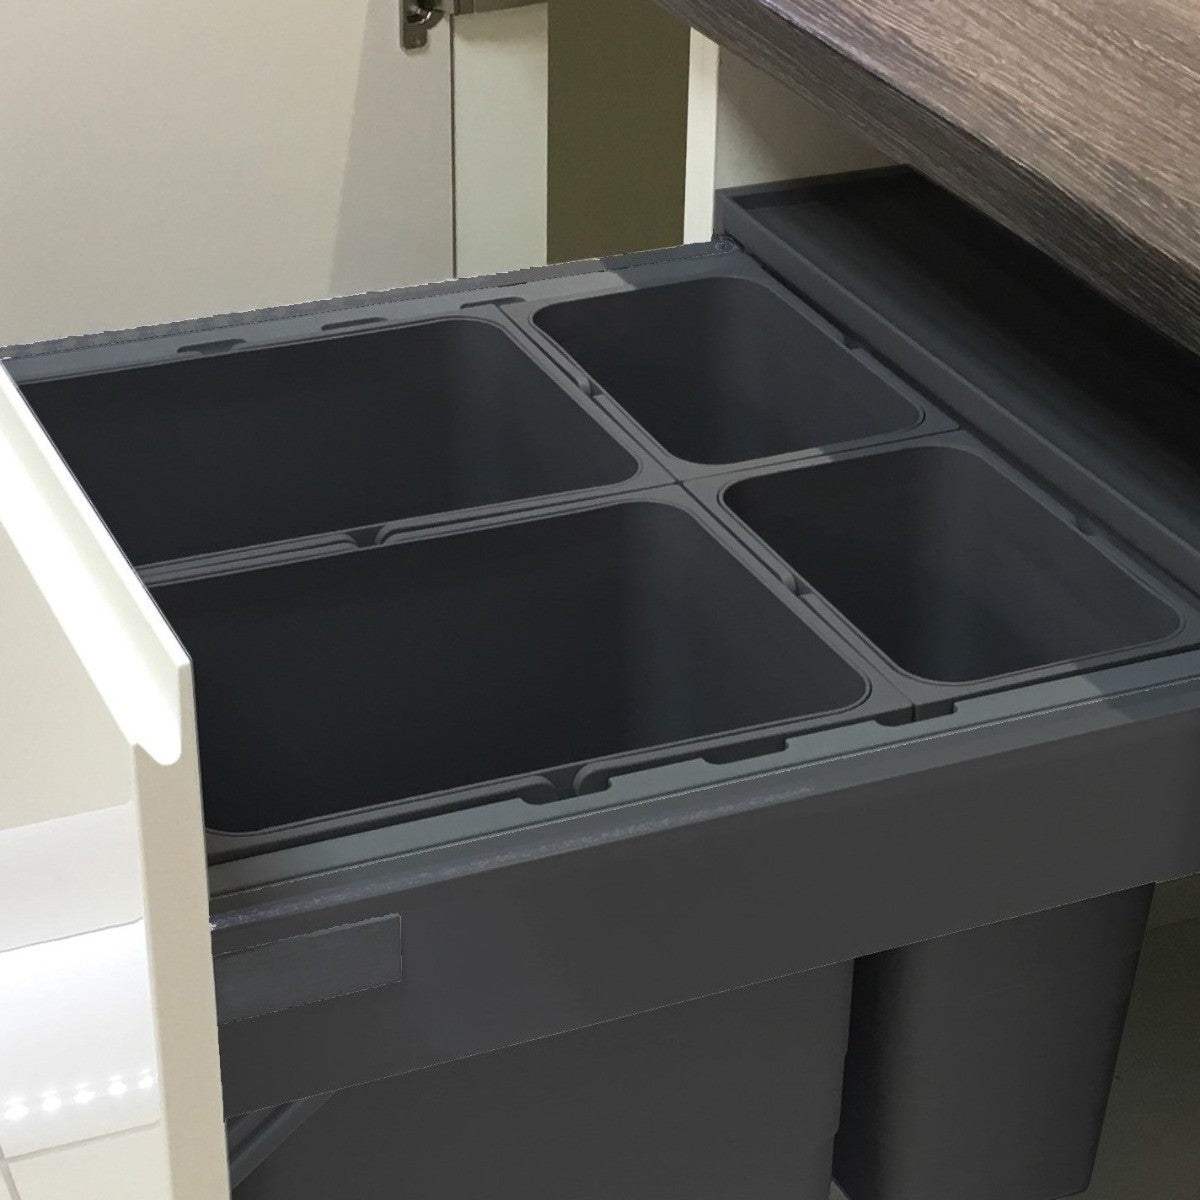 Four Compartment 80L integrated kitchen bin is designed for easy waste and recycling separation in 600mm wide kitchen cabinets with pull-out doors.